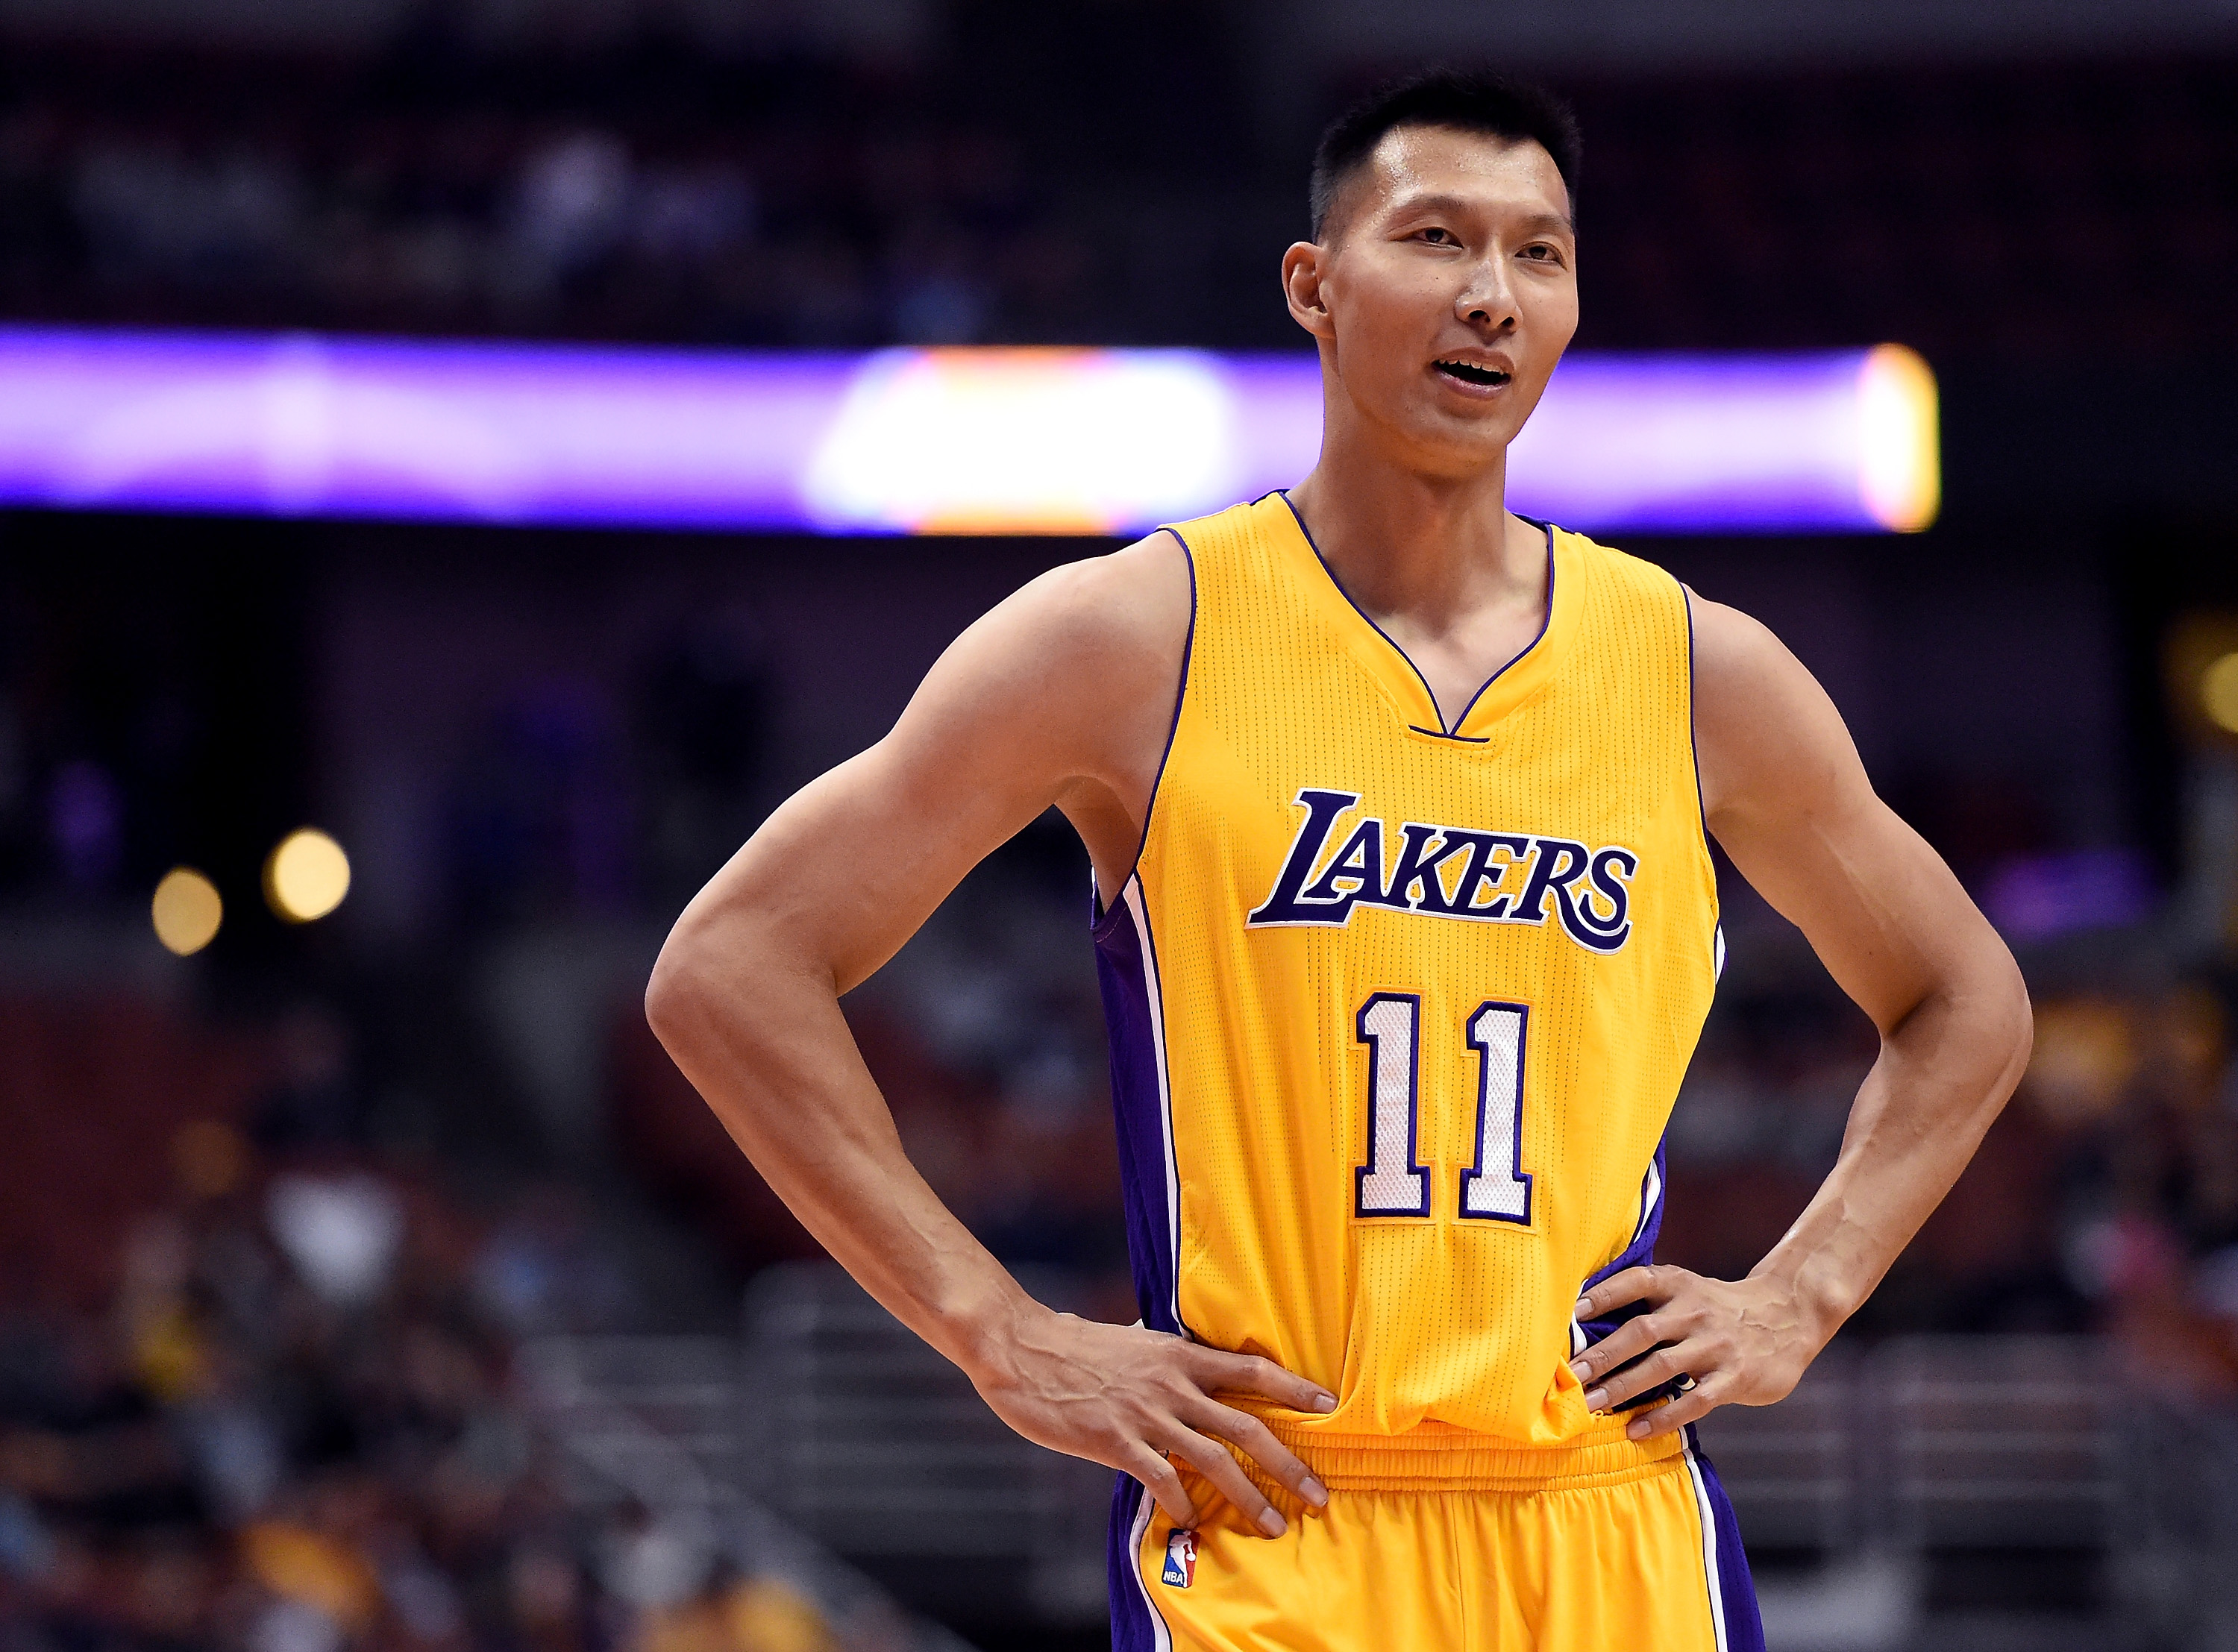 ANAHEIM, CA - OCTOBER 04: Yi Jianlian #11 of the Los Angeles Lakers reacts to his foul on DeMarcus Cousins #15 of the Sacramento Kings during a preseason game at Honda Center on October 4, 2016 in Anaheim, California. NOTE TO USER: User expressly acknowledges and agrees that, by downloading and or using this photograph, User is consenting to the terms and conditions of the Getty Images License Agreement.   Harry How/Getty Images/AFP